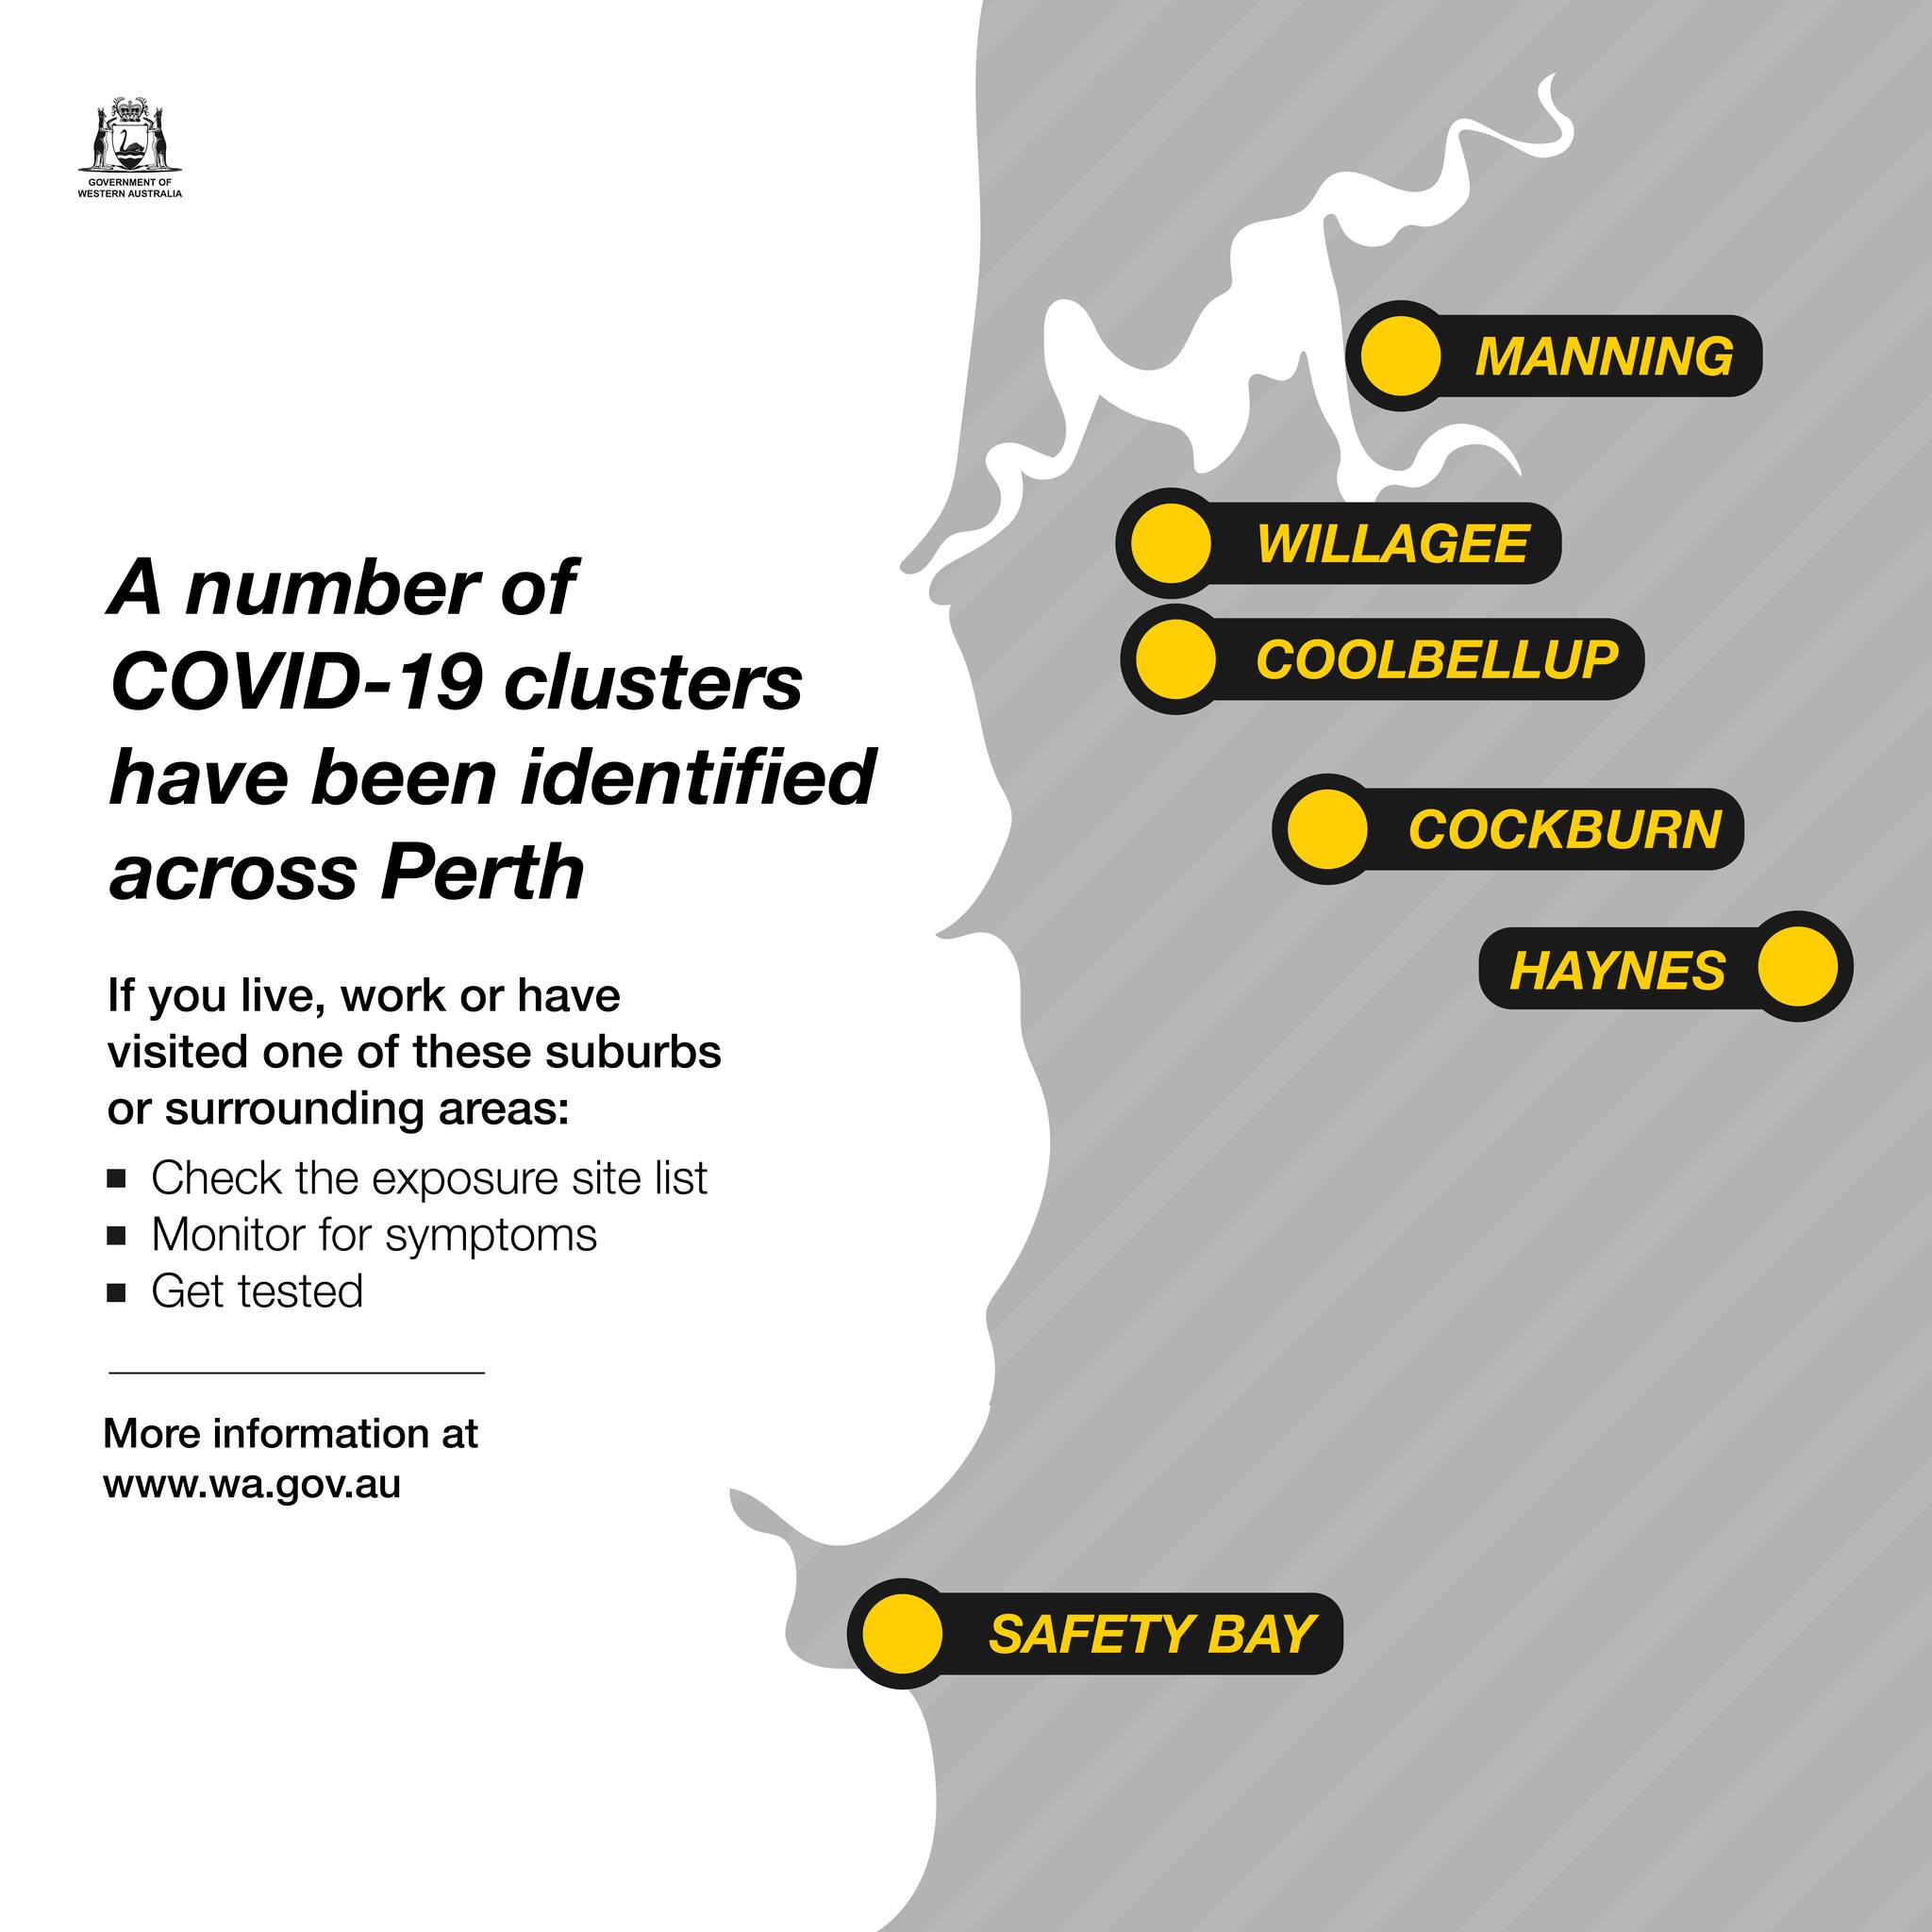 May be an image of text that says 'WEUAI MANNING A number of COVID-19 clusters have been identified across Perth WILLAGEE COOLBELLUP COCKBURN If you live, work or have visited one these suburbs or surrounding areas: Check the exposure site list Monitor for symptoms Get tested HAYNES More information at www.wa.gov.au SAFETY BAY'